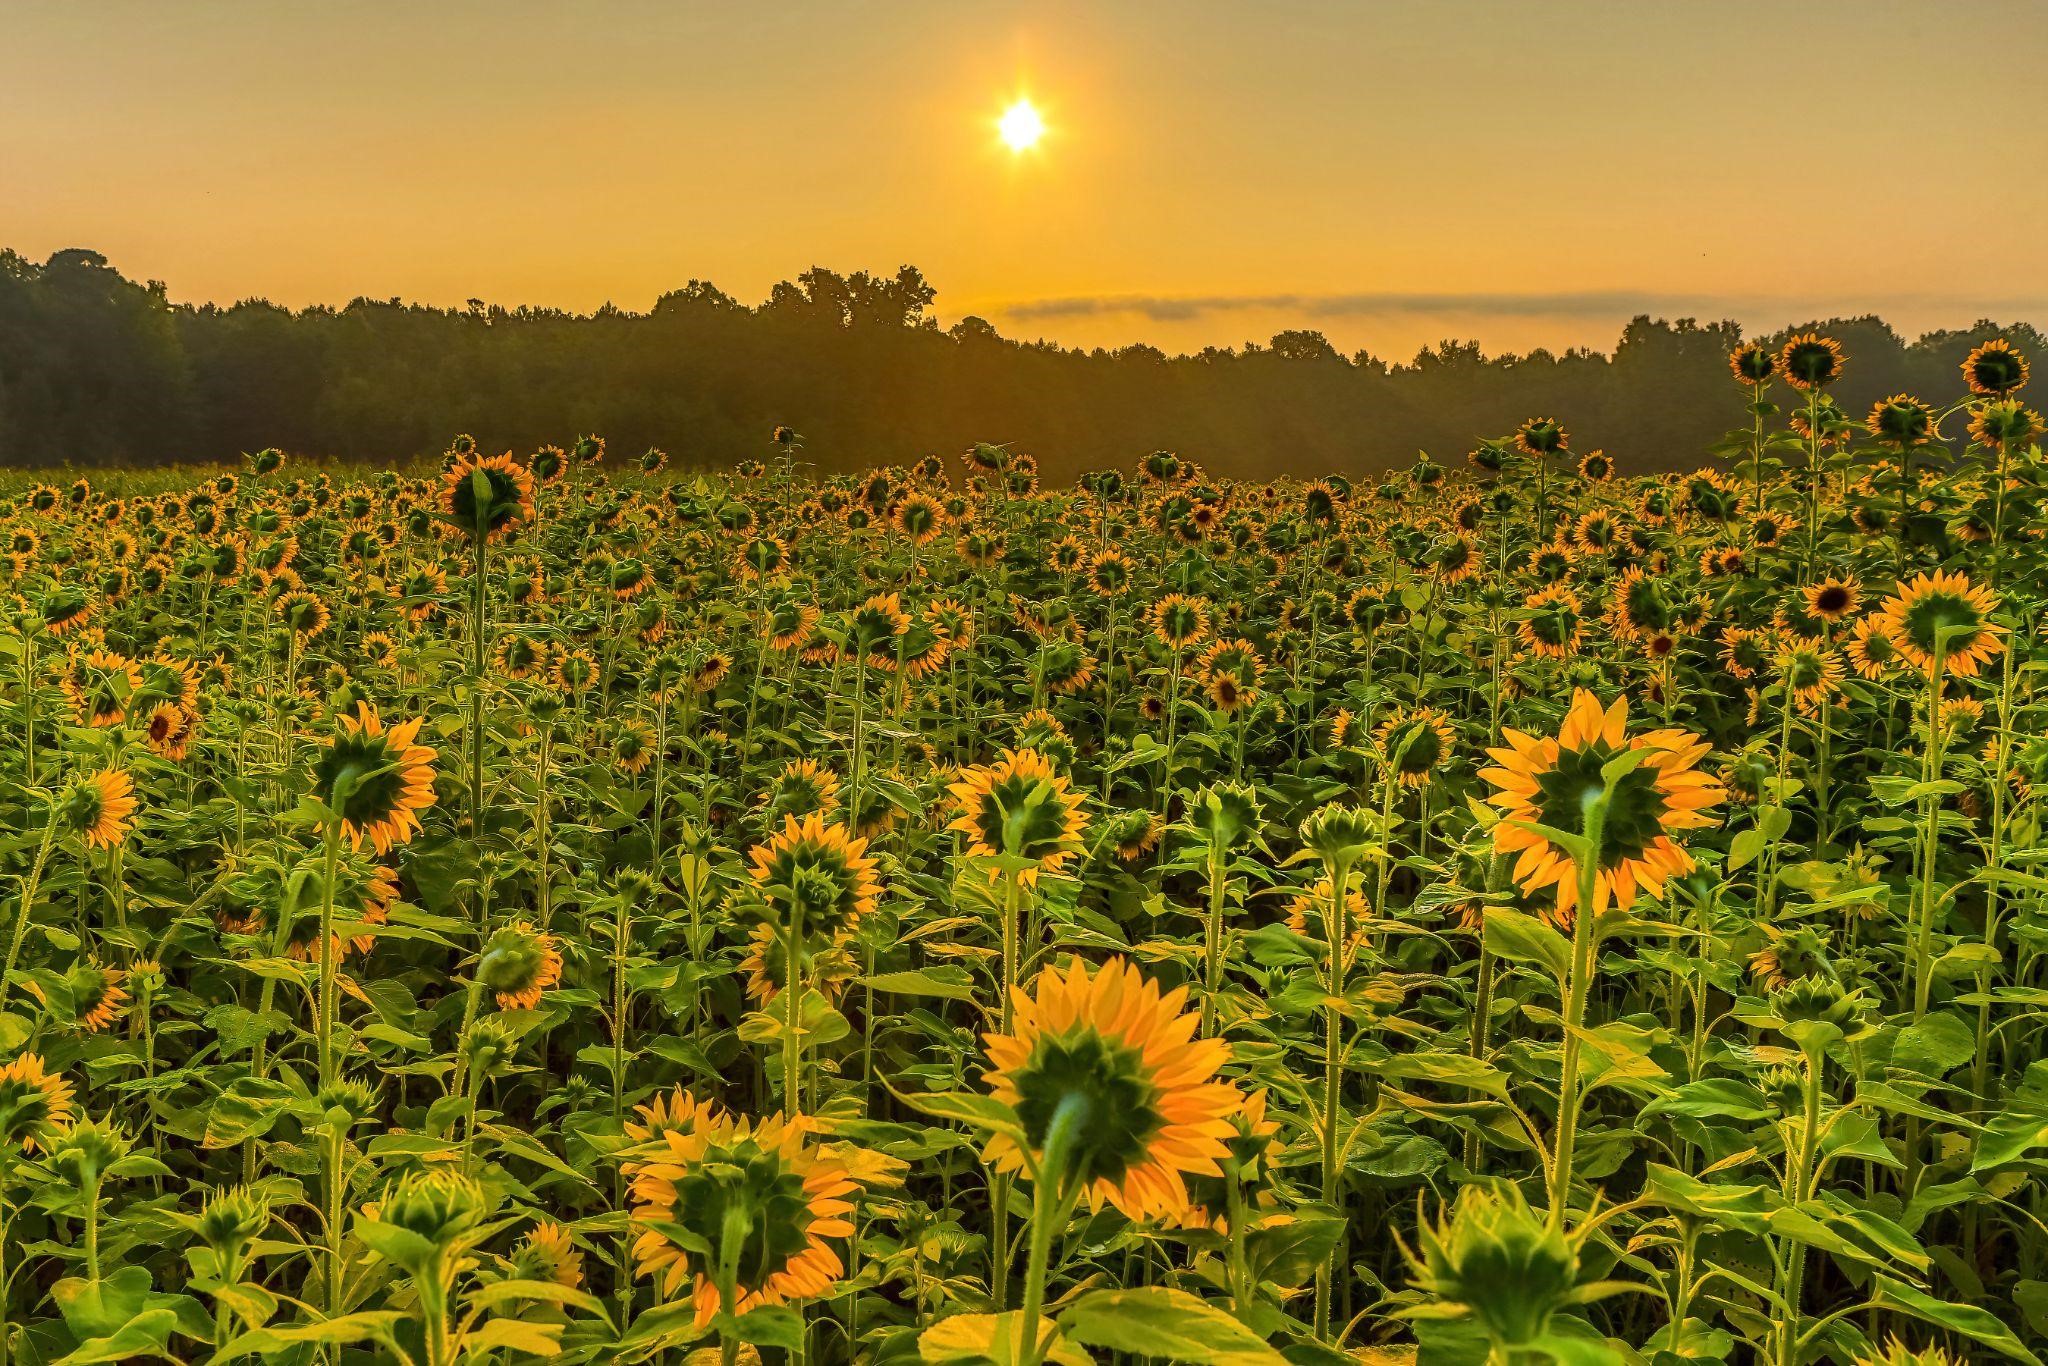 Sunflowers-The Happiest Flower in the Garden